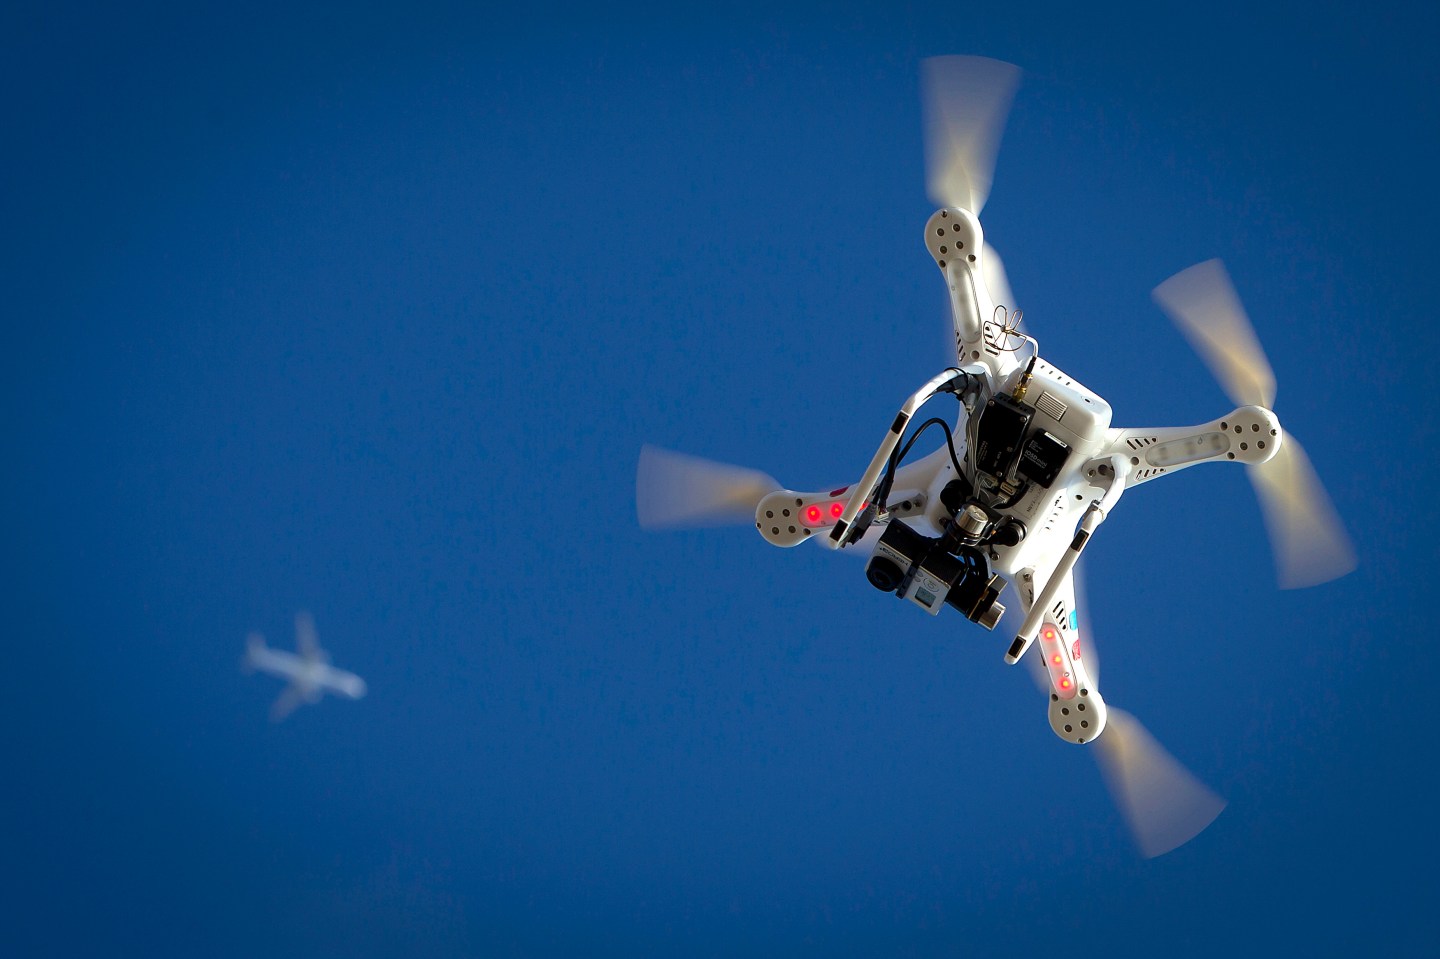 Airplane flies over a drone during the Polar Bear Plunge on Coney Island in the Brooklyn borough of New York